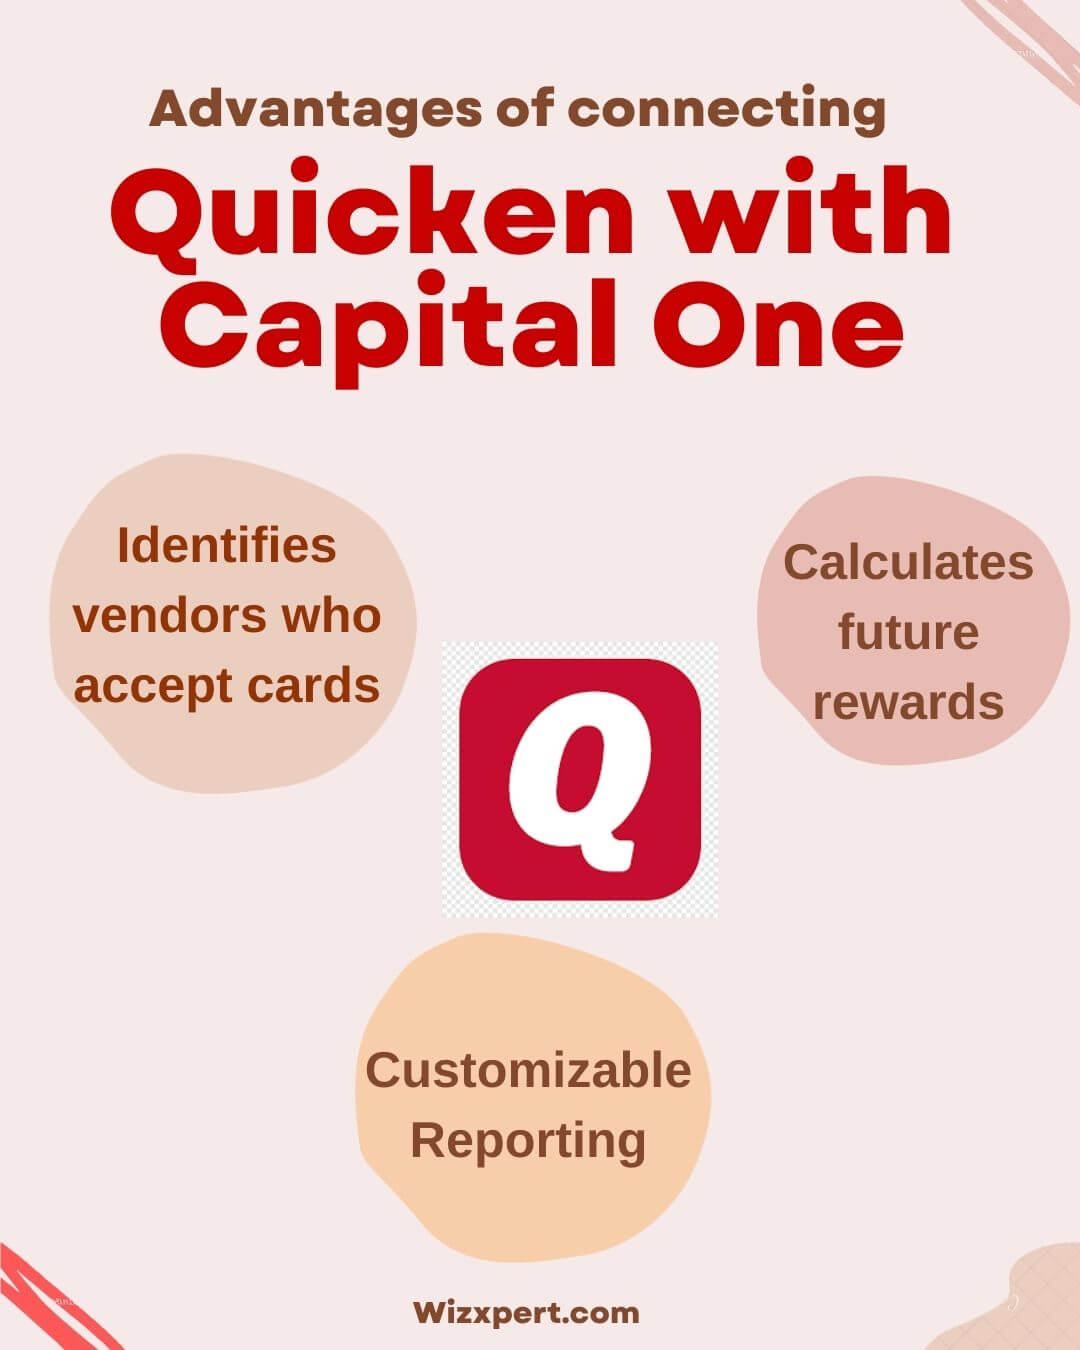 Advantages of connecting Quicken with Capital One